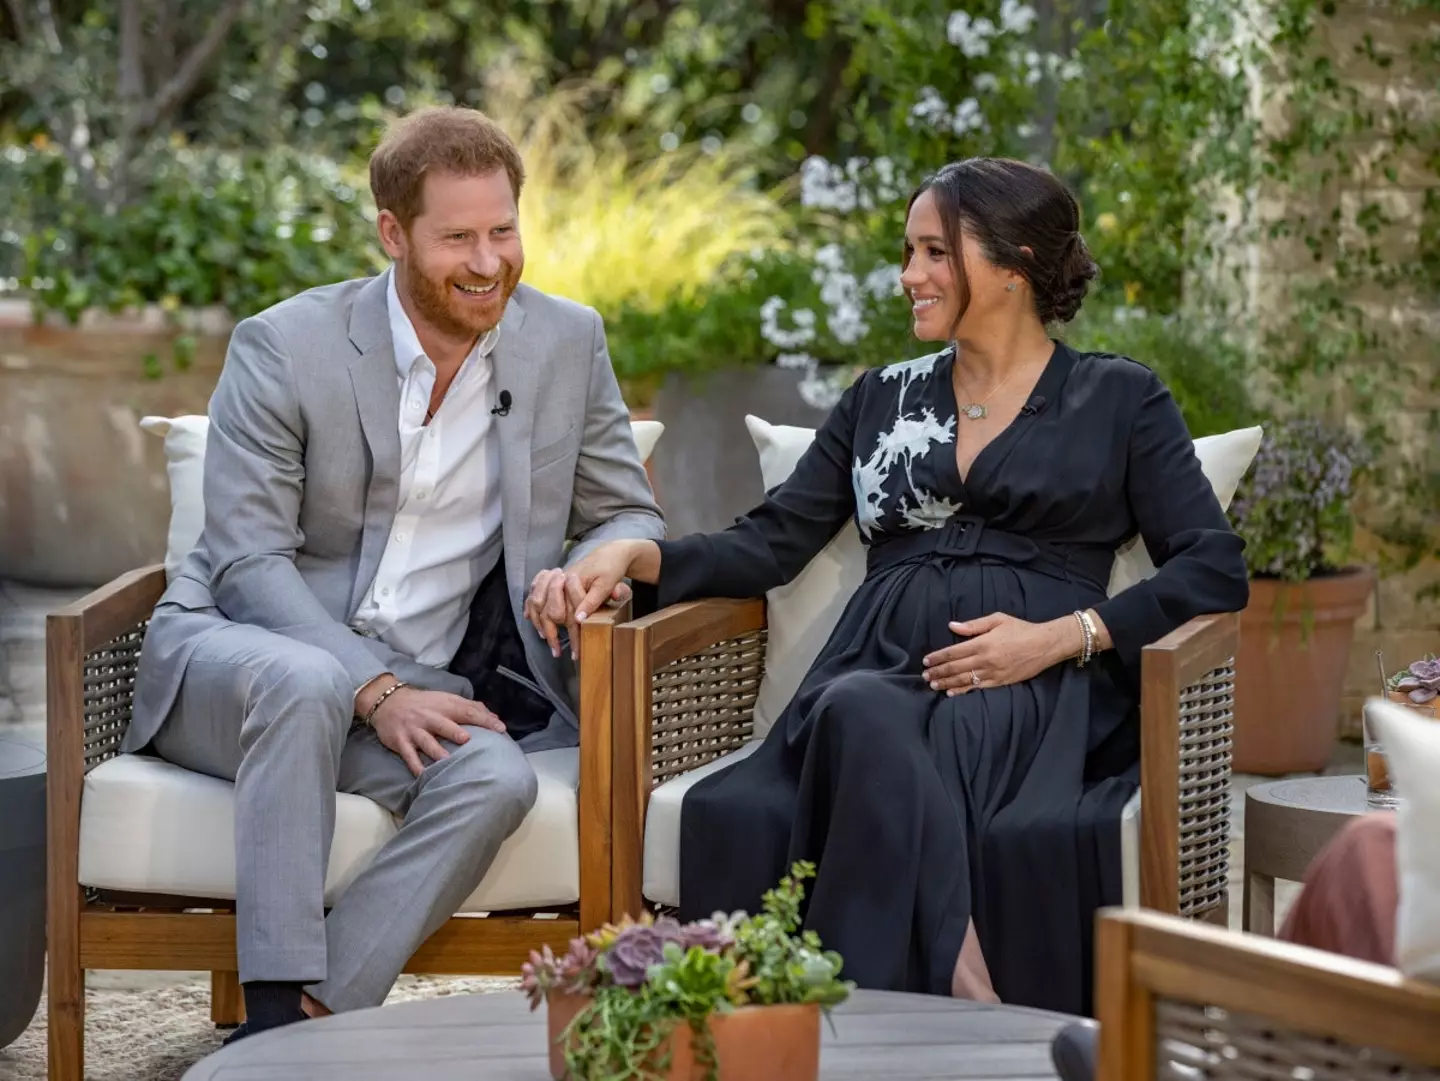 Meghan Markle has sent an open letter to Congress about parental and sick leave legislation in the US (